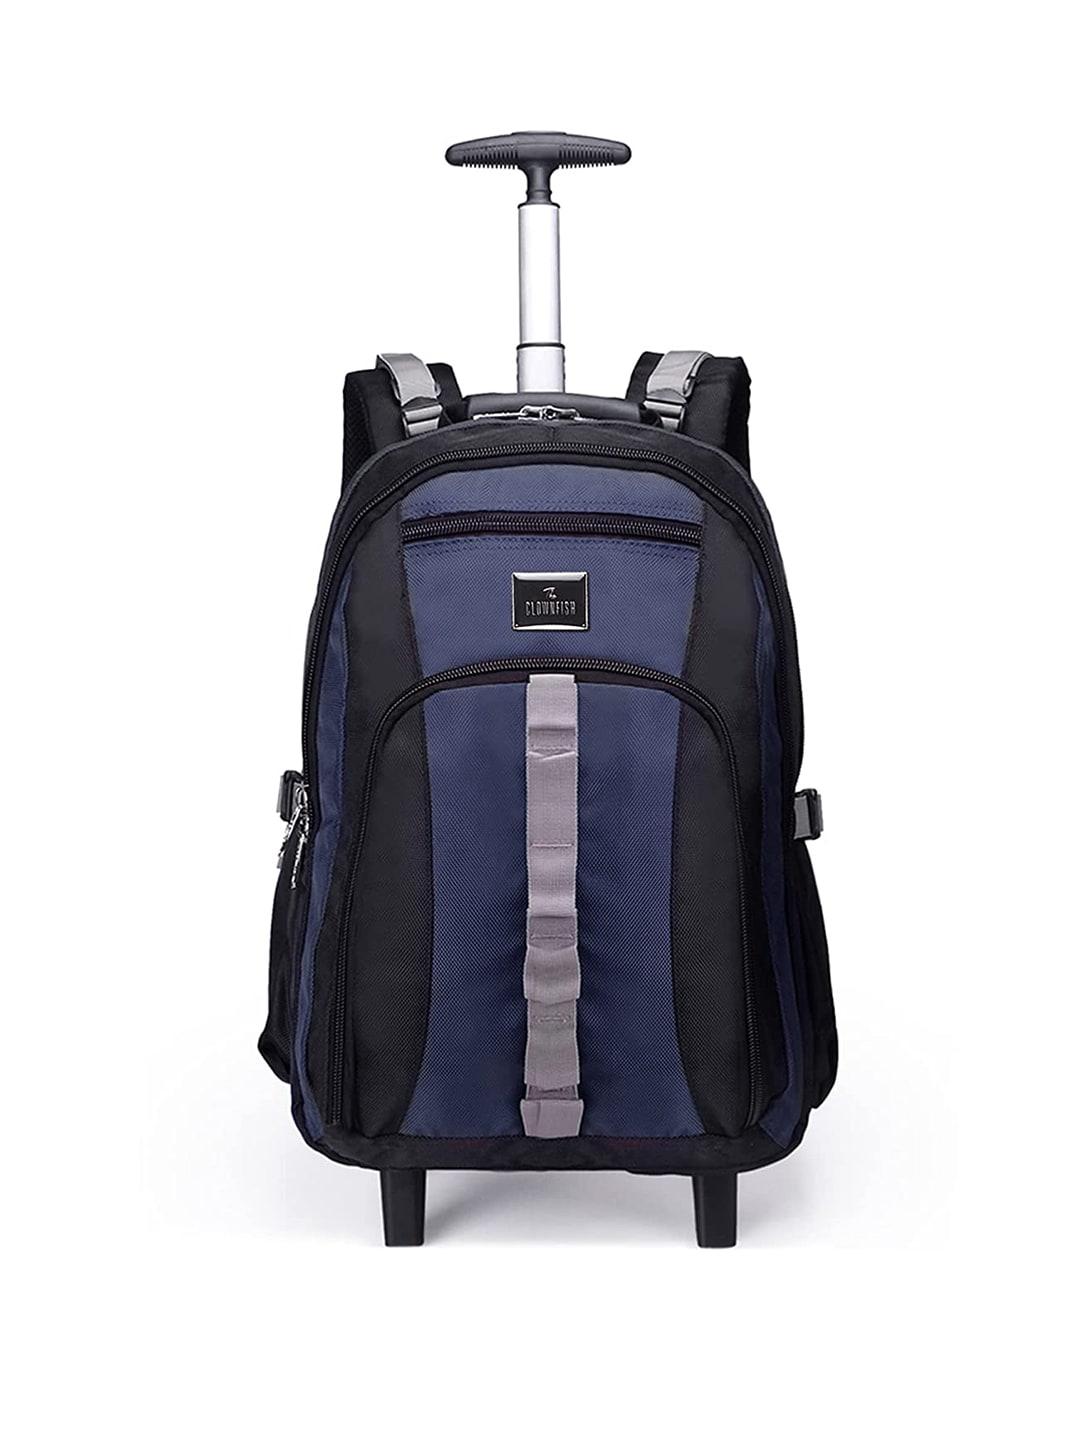 the-clownfish-water-resistant-two-wheel-laptop-trolley-backpack-with-compression-straps